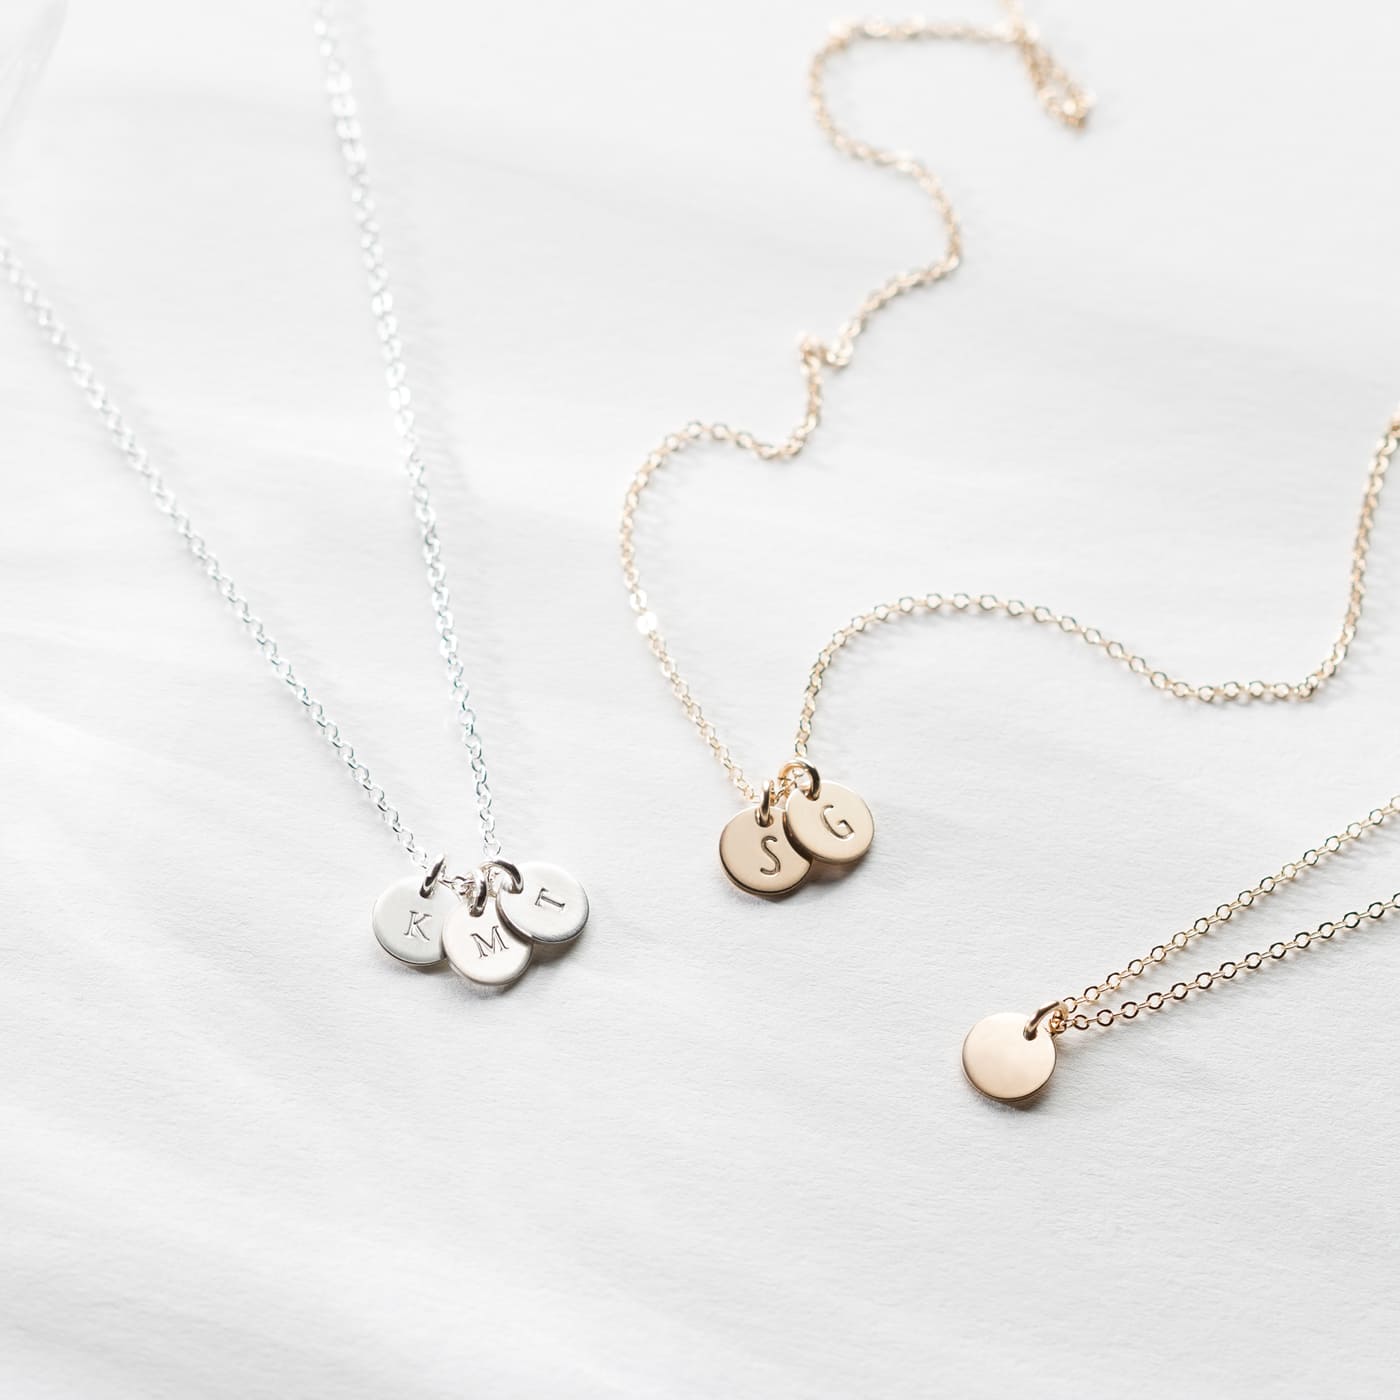 Personalized Mother's Necklace with Children's Names | JoyAmo Jewelry